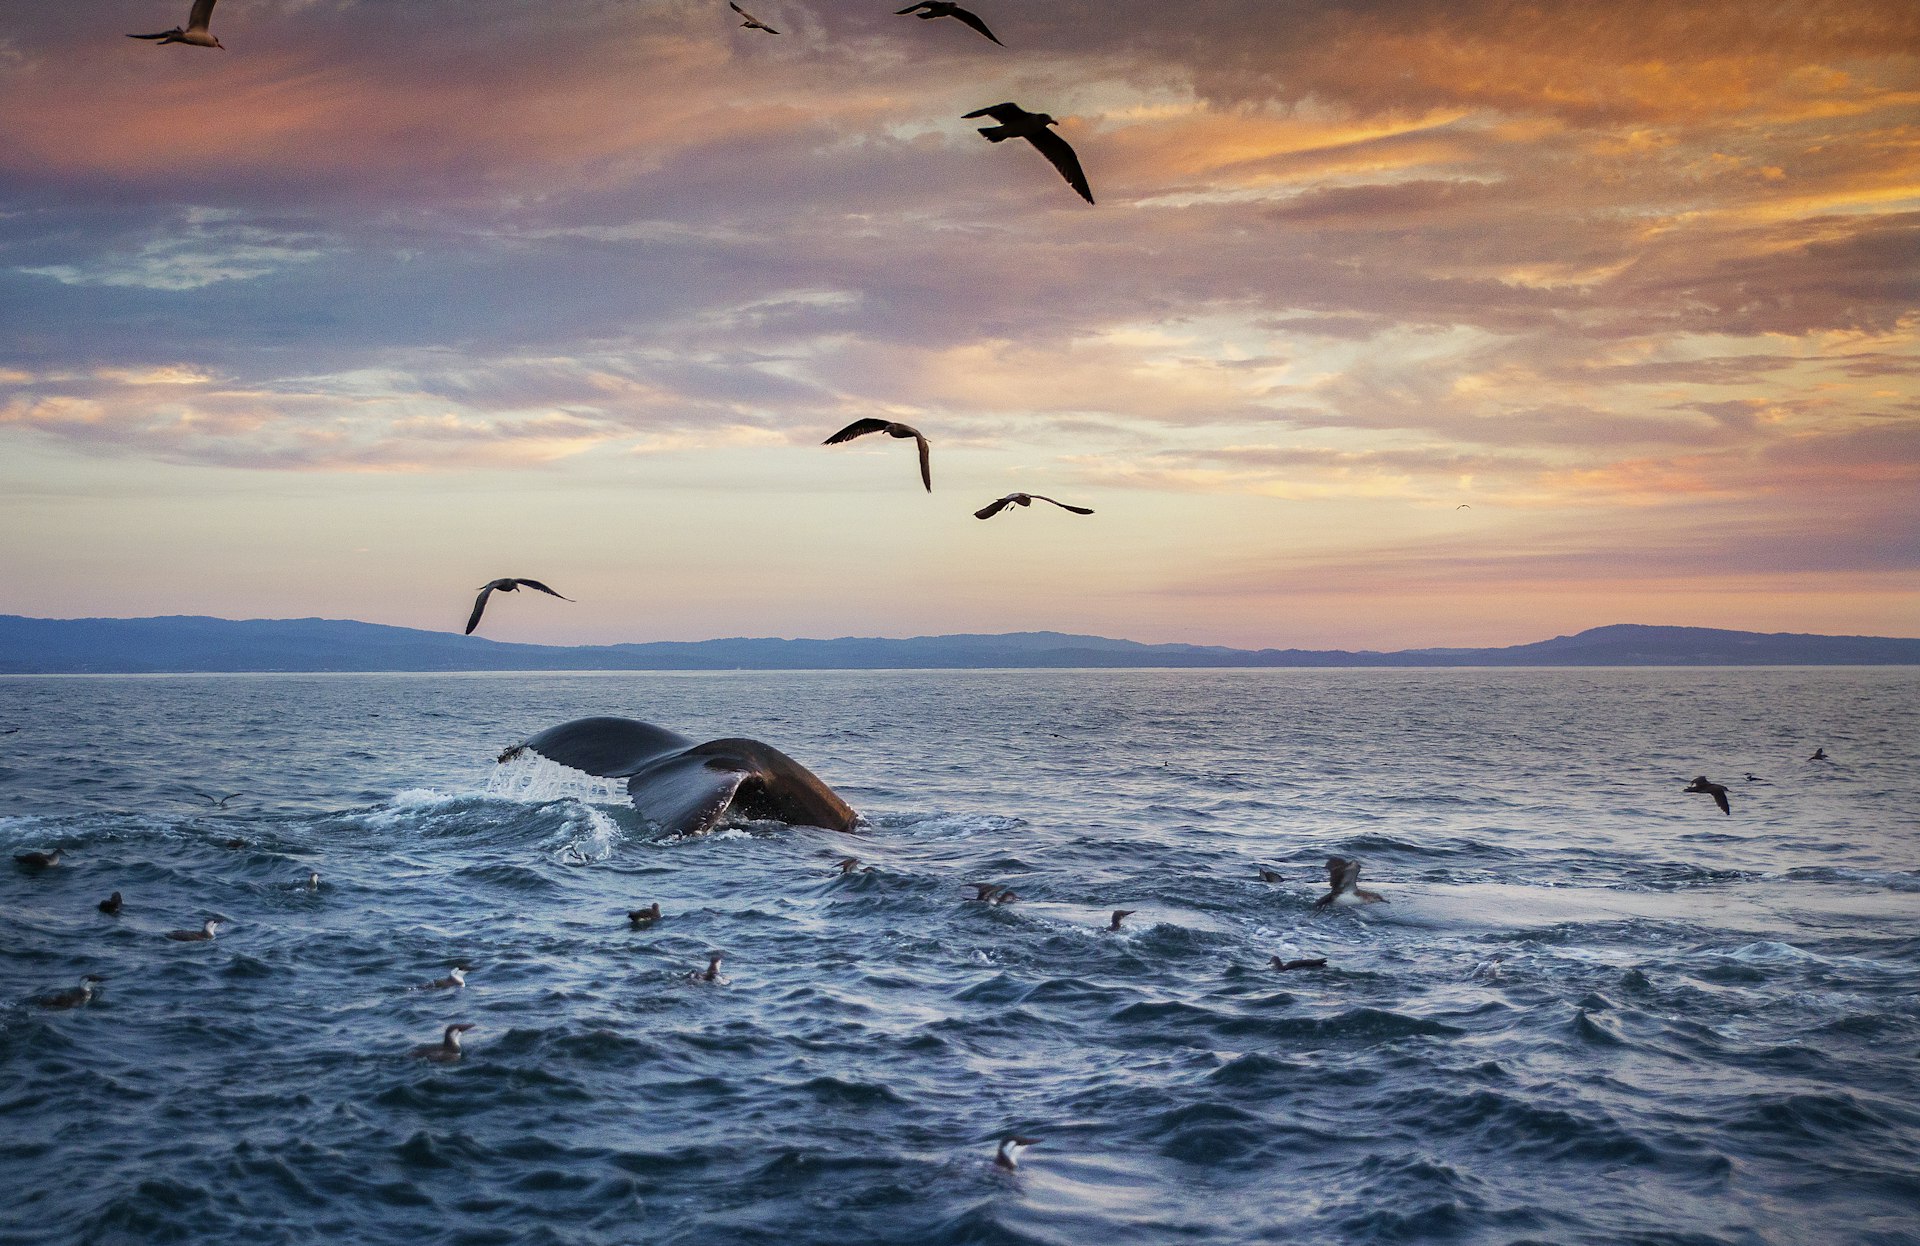 A humpback whale's tail is visible as it dives deep into the waters of Monterey at sunset. Birds are flying above the water as well as floating on the surface. 